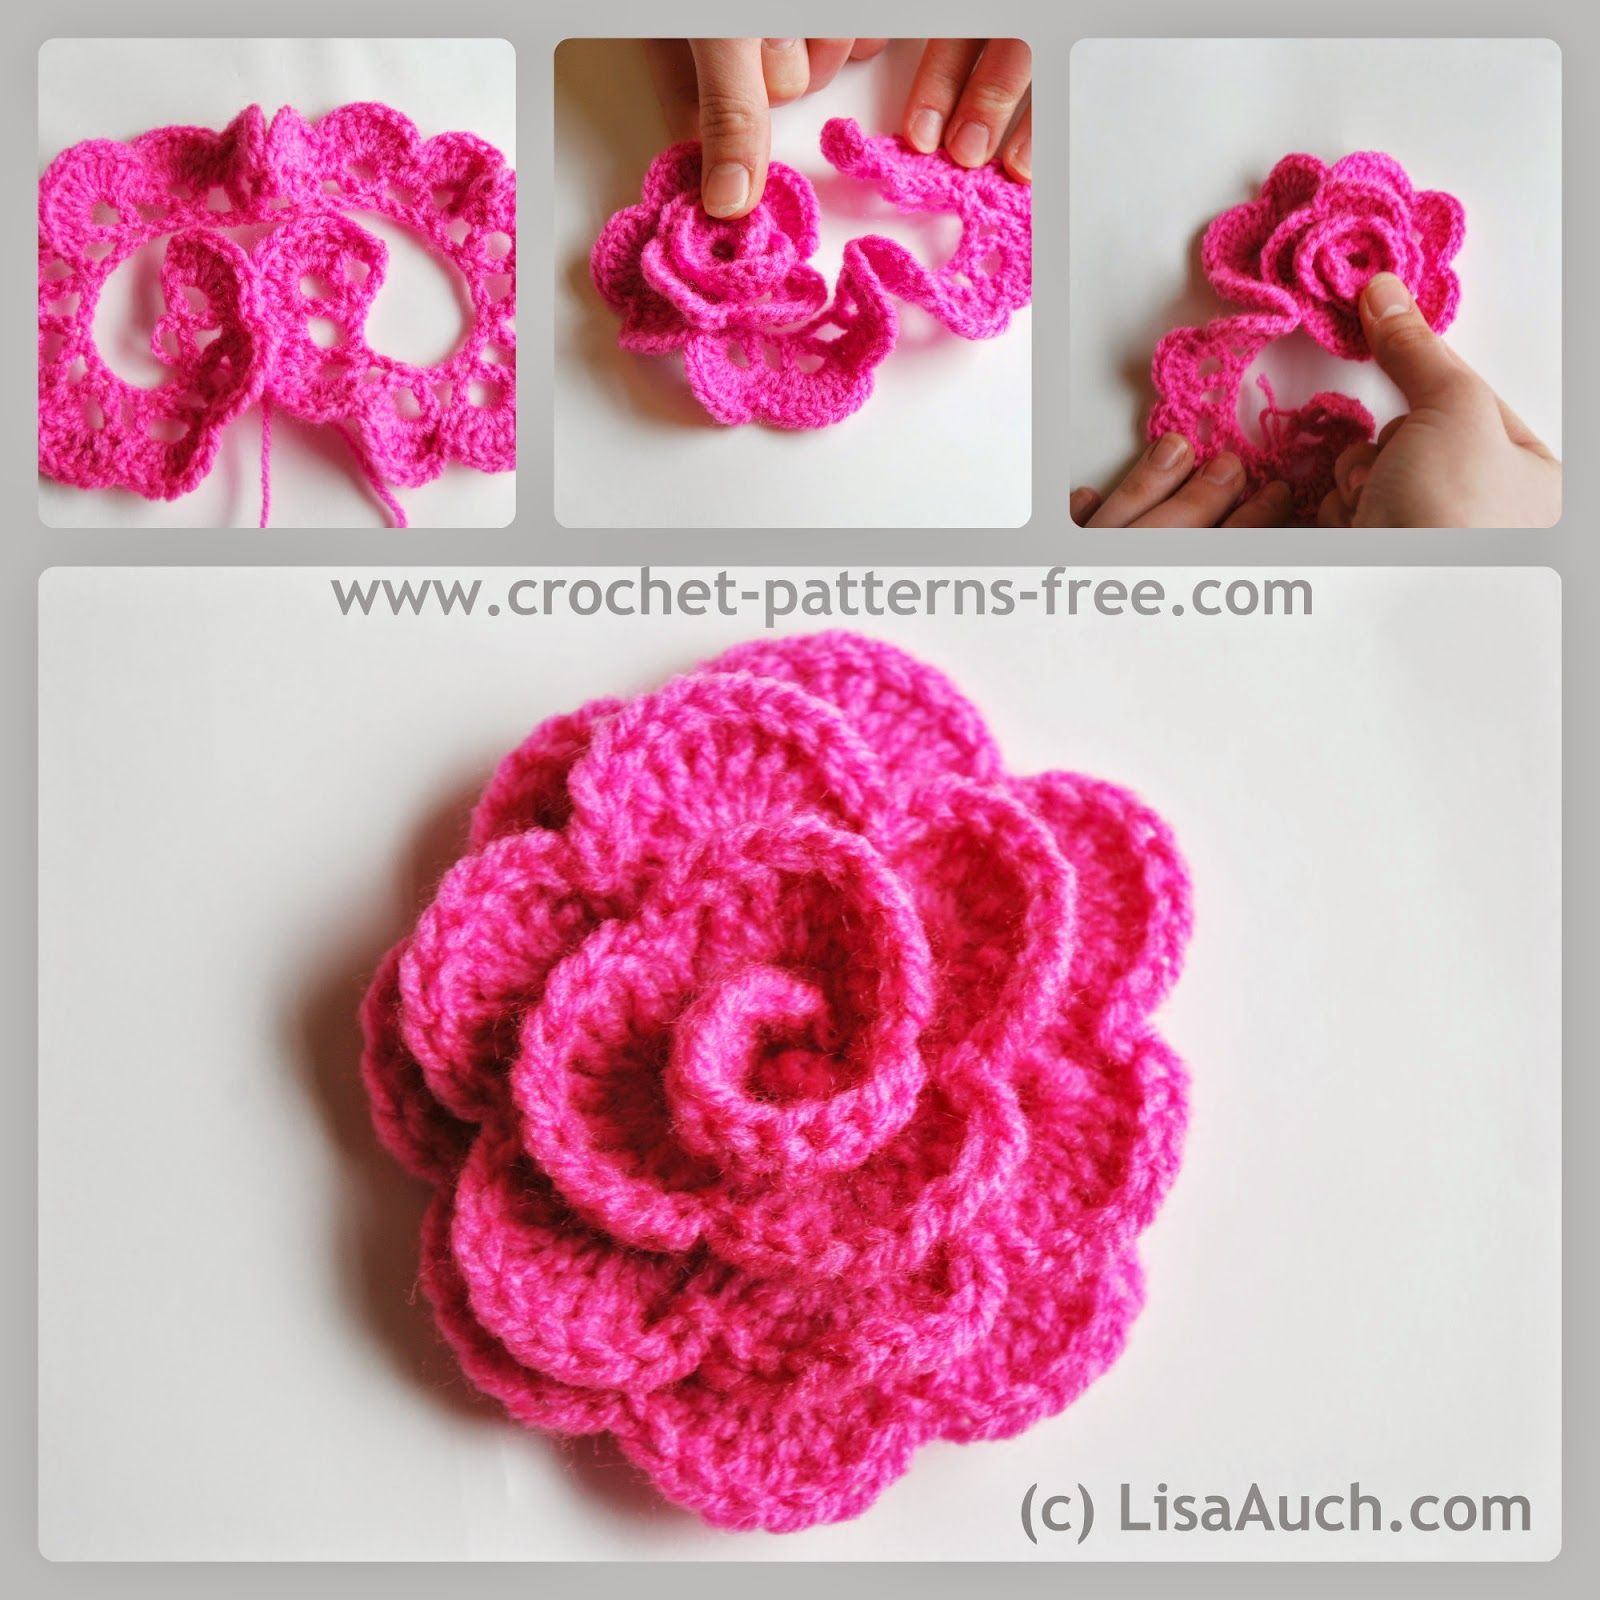 Crochet Sunflower Pattern Free Crochet Flower Pattern How To Crochet A Rose Sewing And